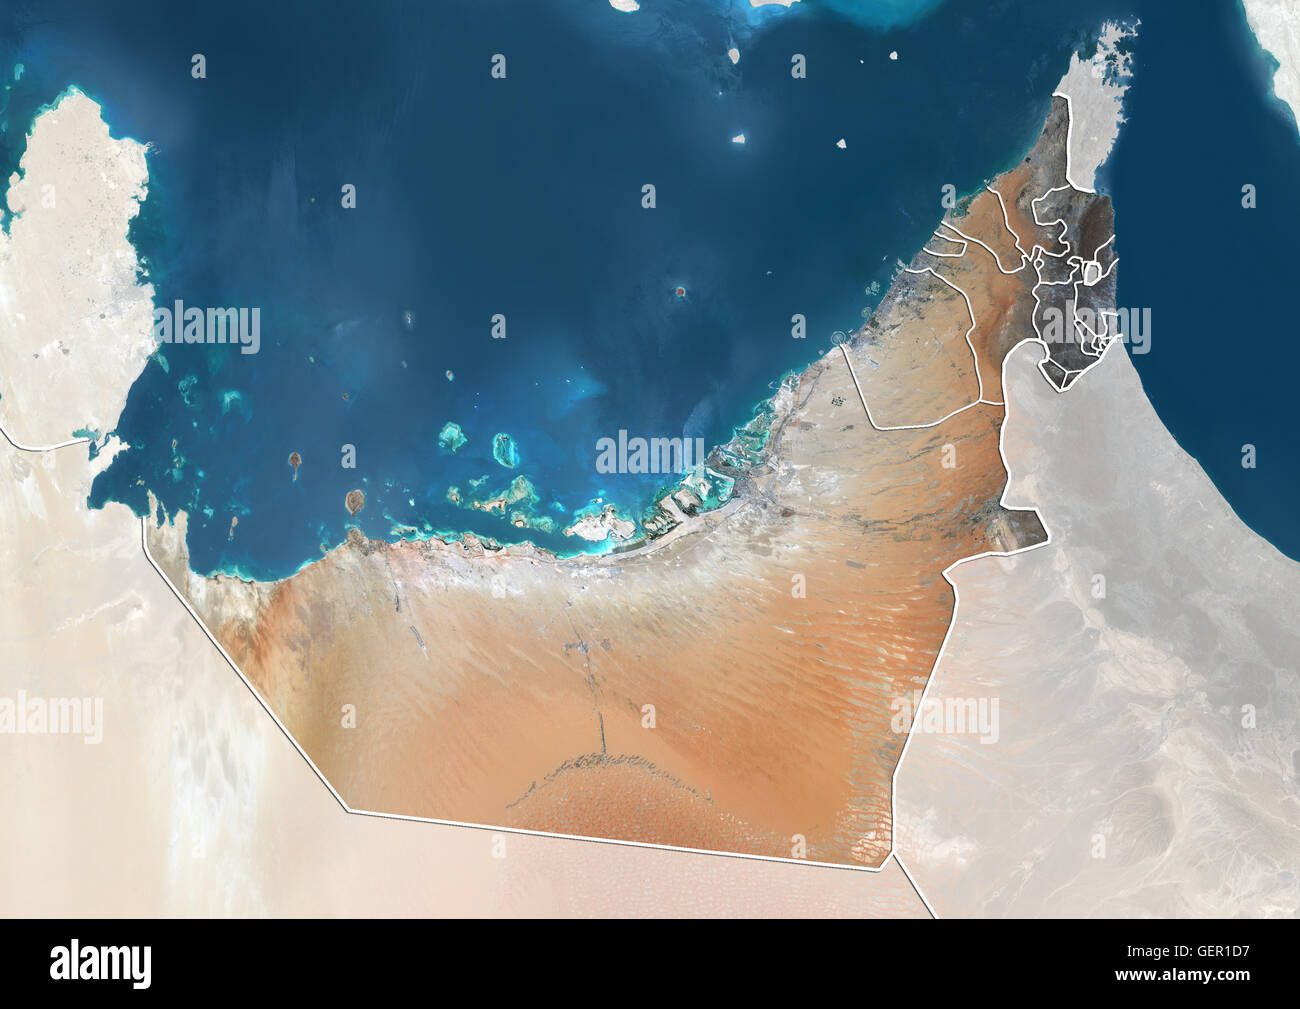 Satellite view of the United Arab Emirates (with country boundaries and mask). The image shows the Emirates of Dubai, Sharjah, Ajman, Umm al-Quwain, Ras al-Khaimah and Fujairah. This image was compiled from data acquired by Landsat 8 satellite in 2014. Stock Photo